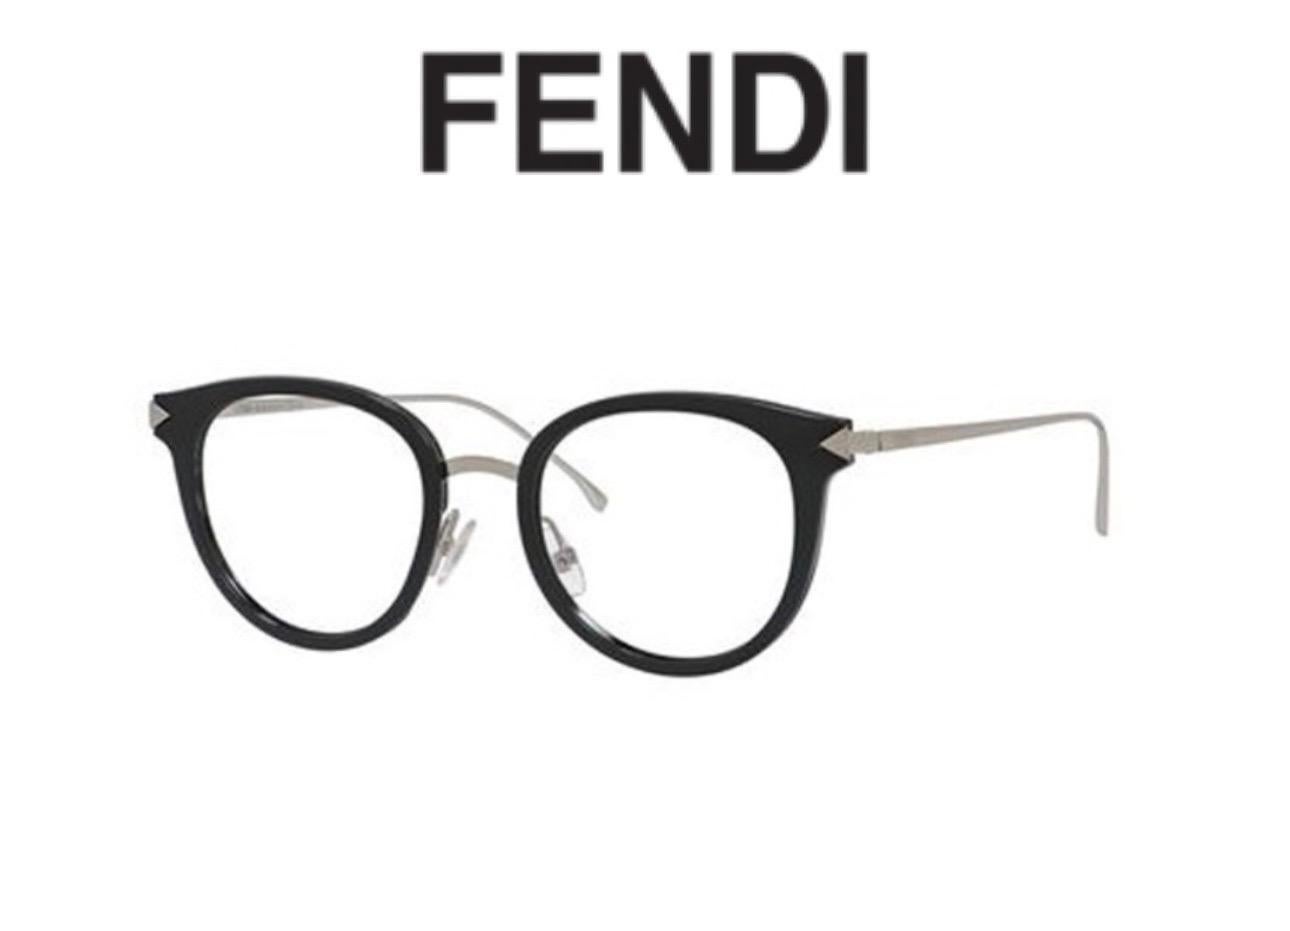 COLOR: 0V59 Blue Gold
STYLE: Round
FRAME TYPE: Full Rim
GENDER: Women
MATERIAL: Metal
AGE GROUP: Adult
LENS COLOR: Demo Lens
Description
The Fendi Ff 0166 is a perfect choice of Eyeglasses from the fabulous Fendi collection. These exciting